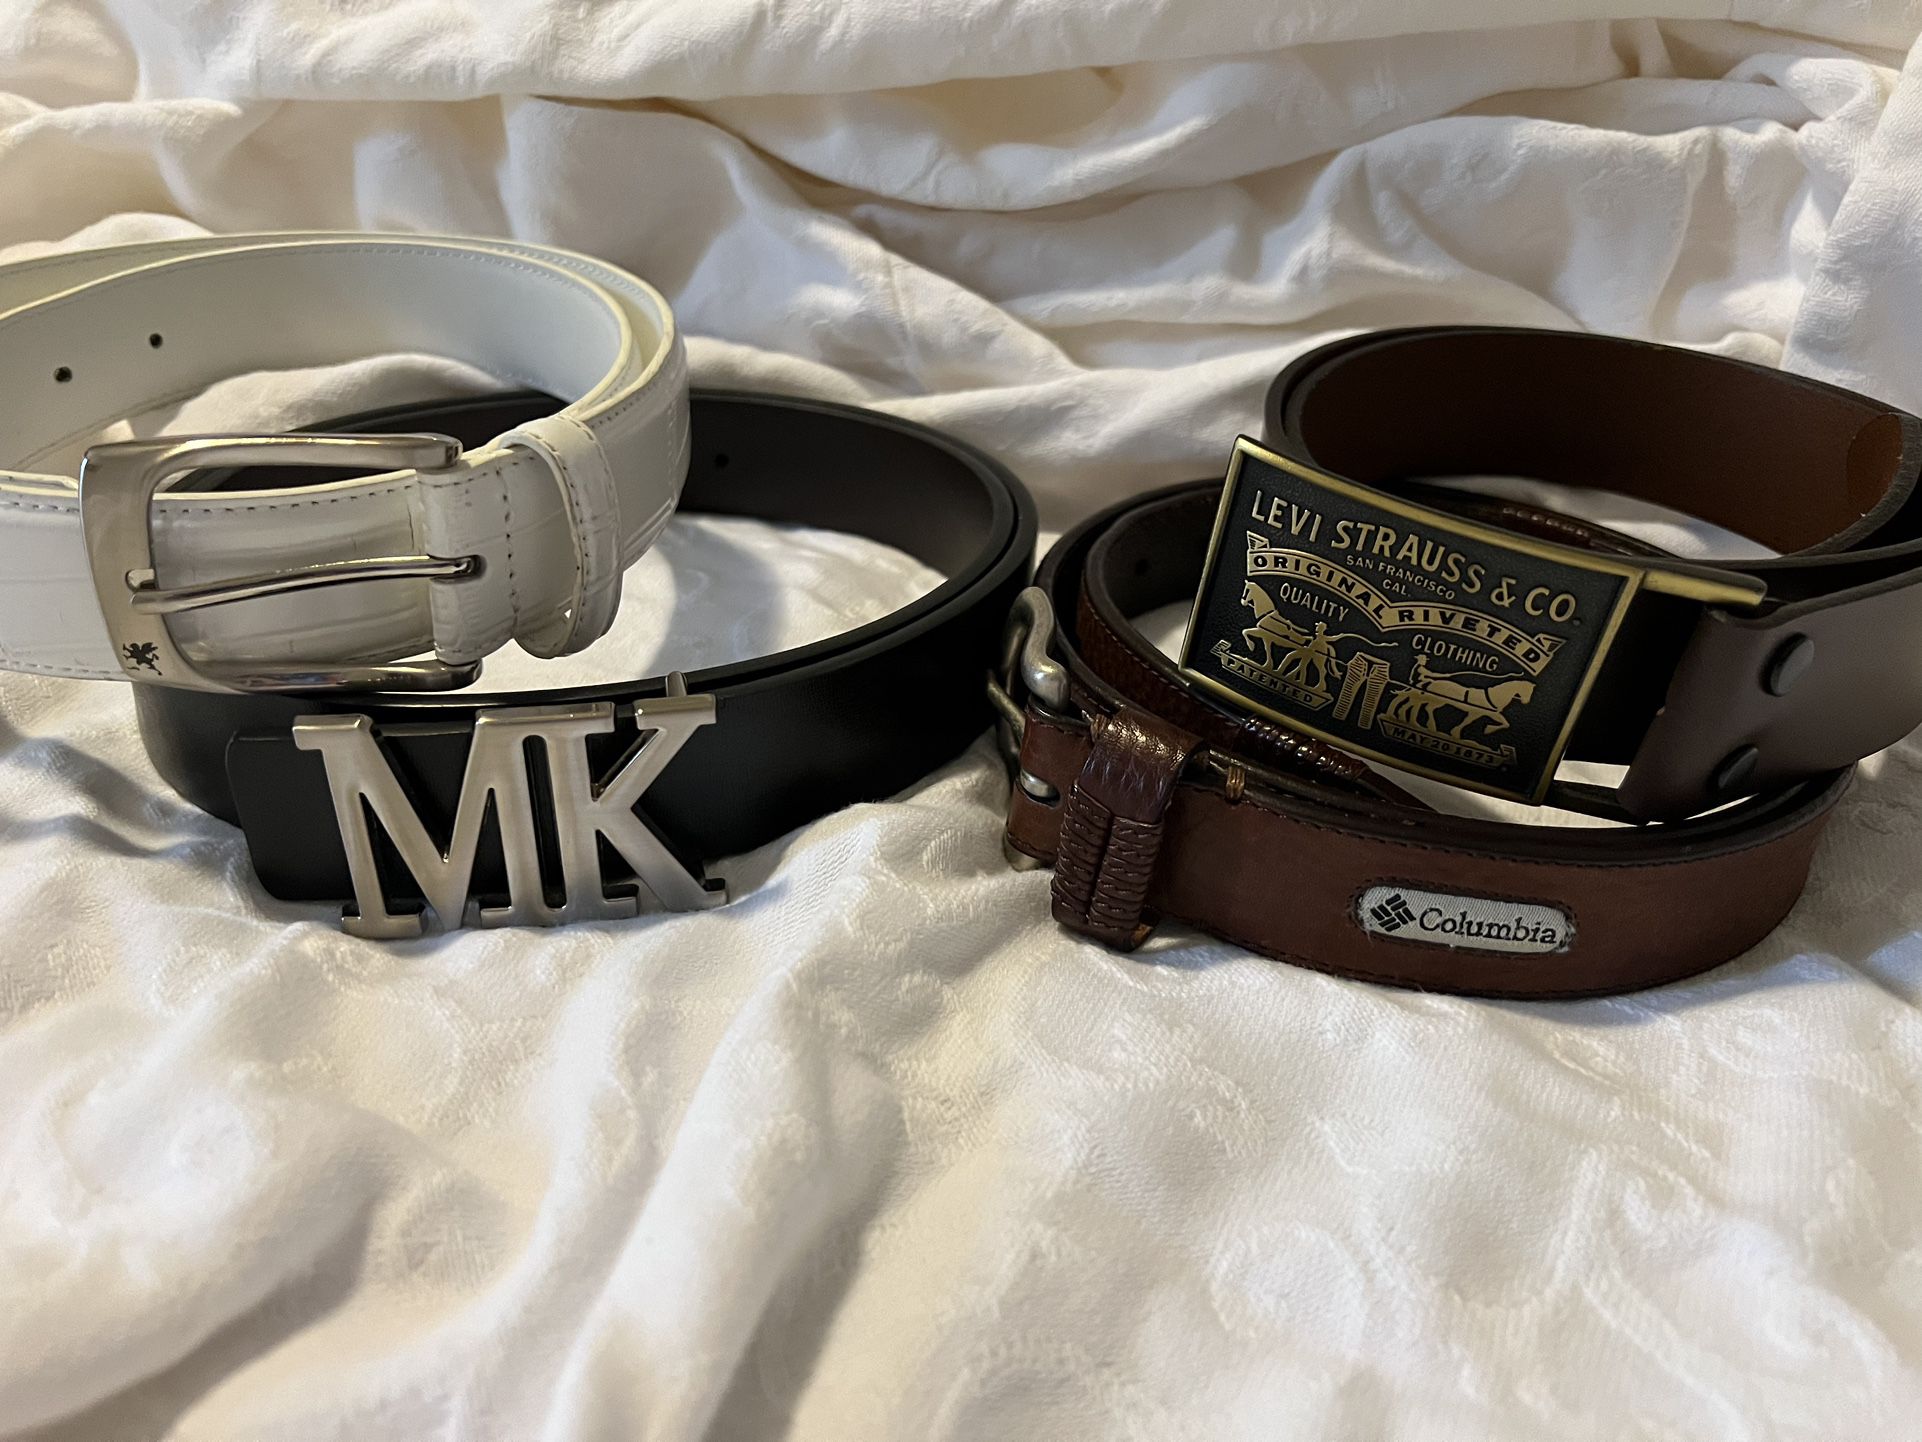 ‼️‼️  ALL  4   BELTS   FOR  ONLY  $40 - MENS  WAIST  SIZE -  32 x 34 